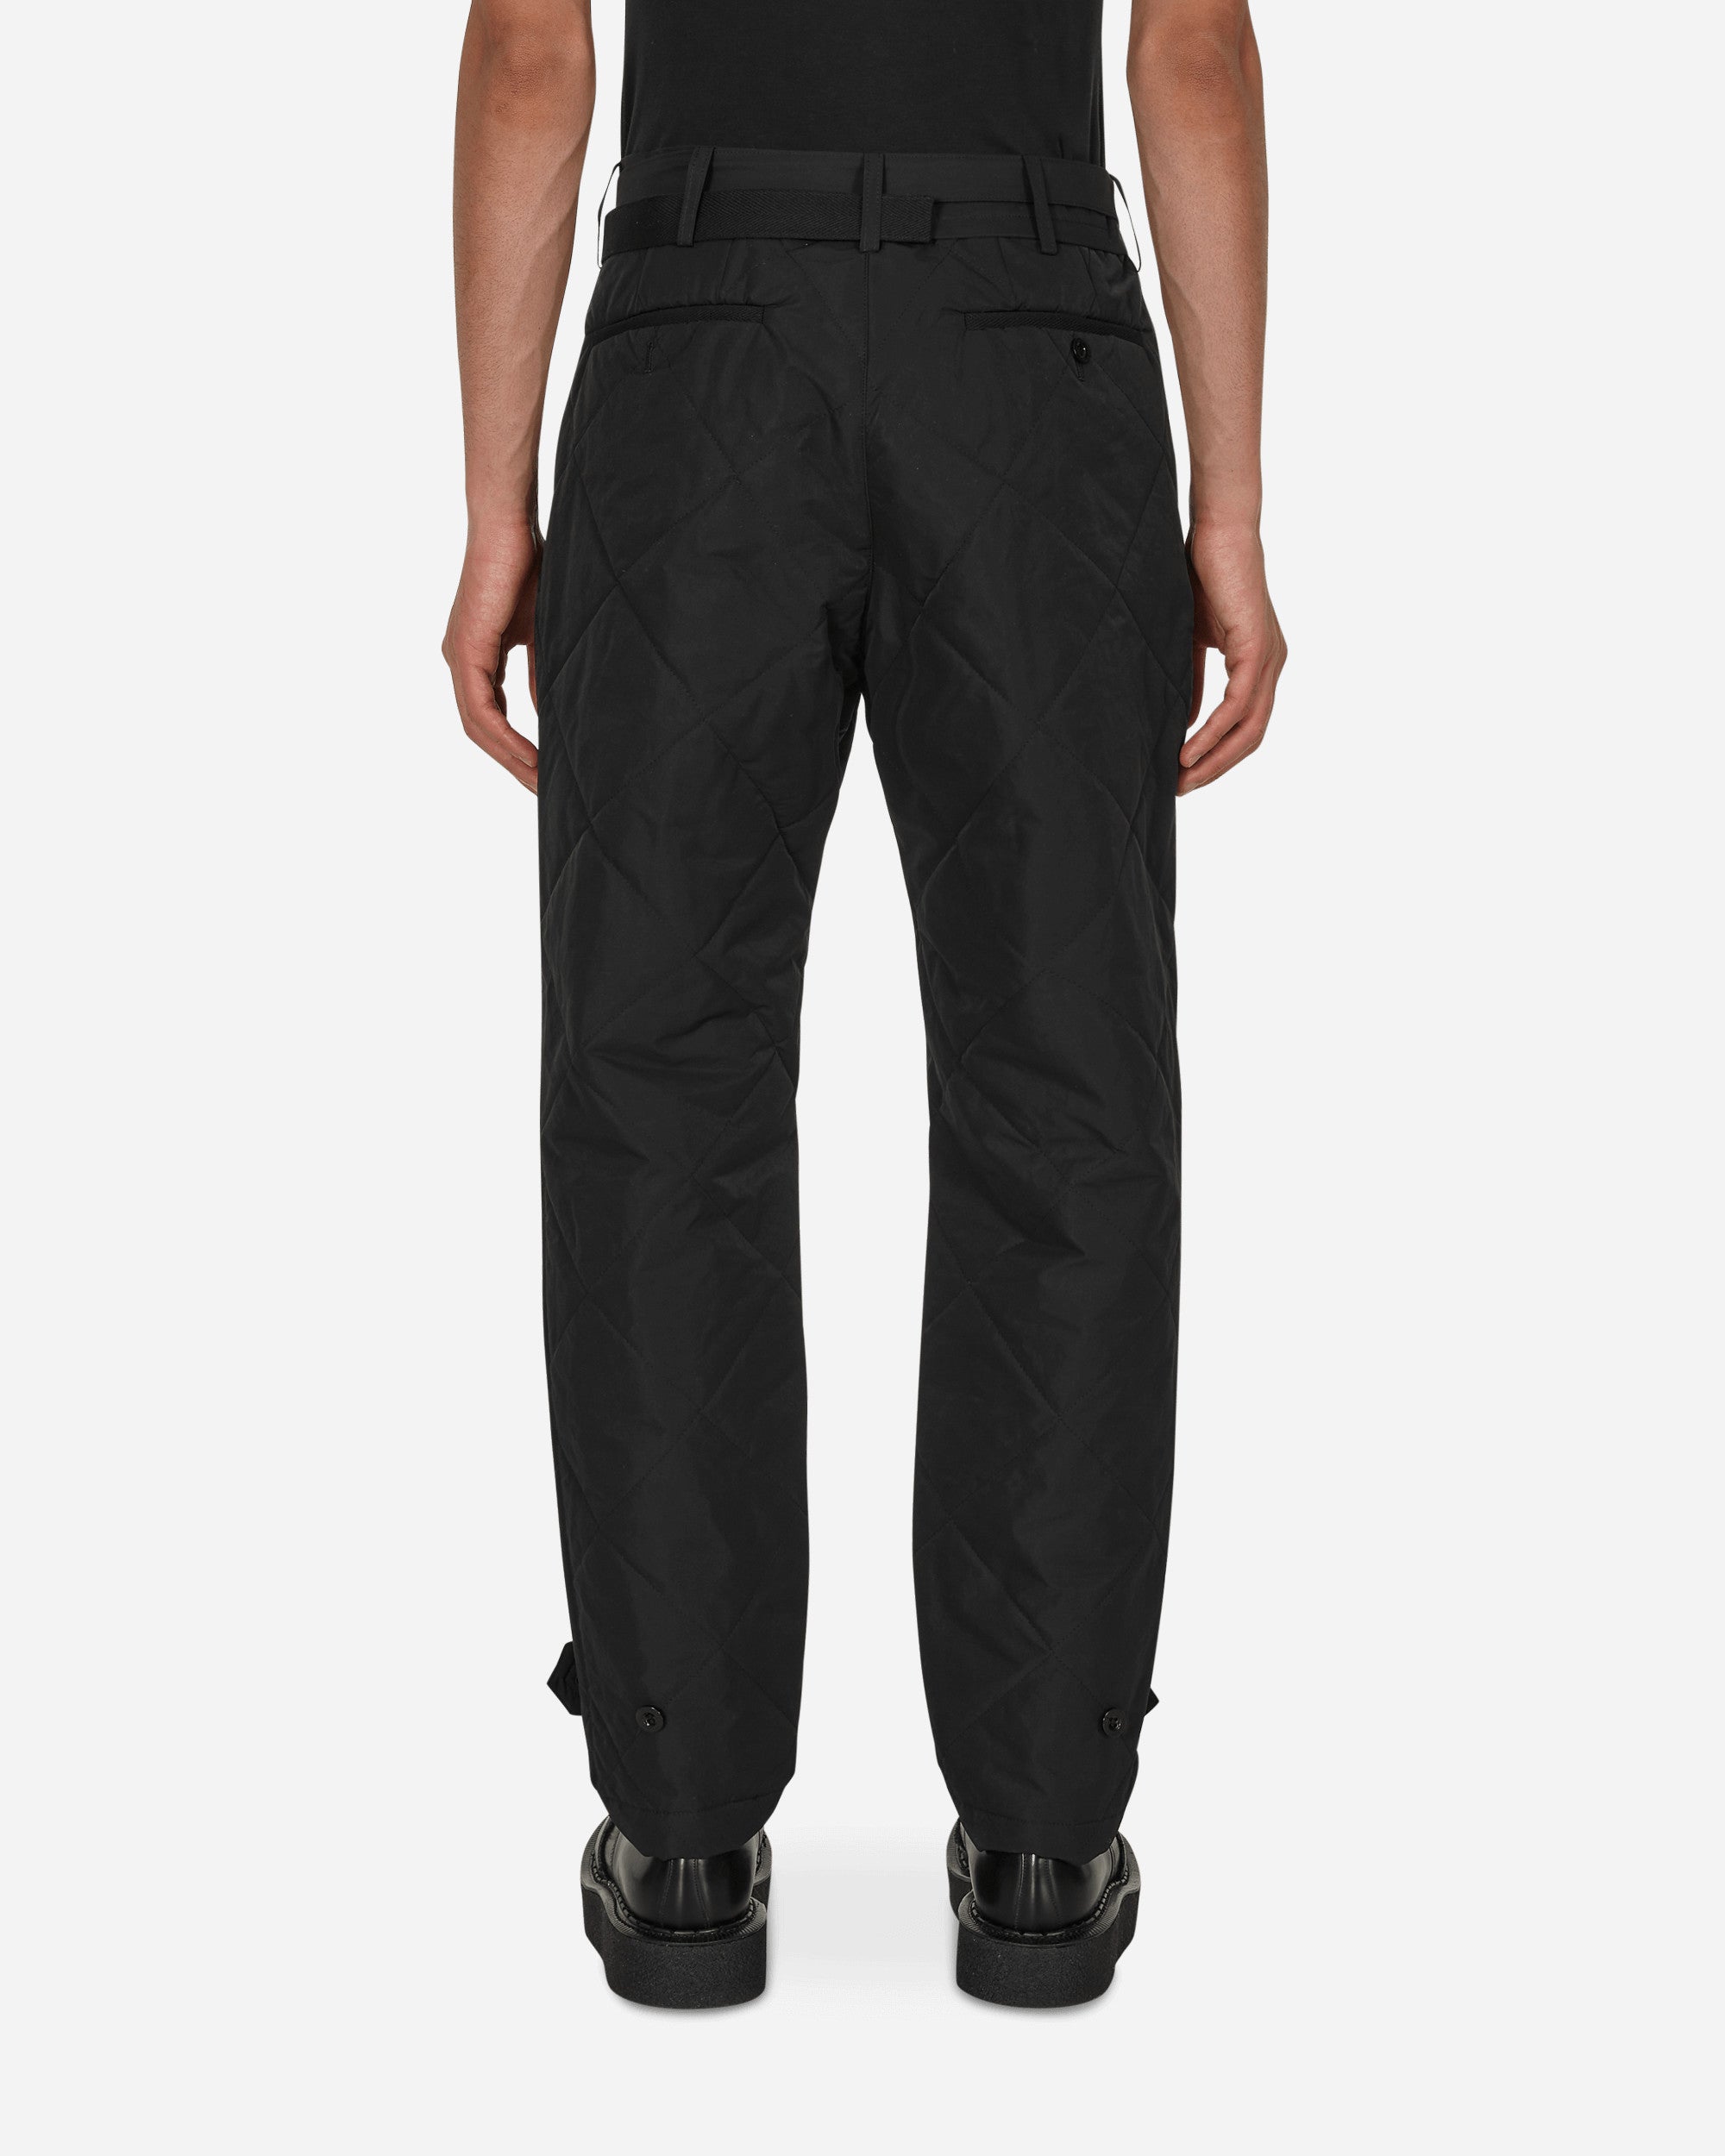 Sacai Quilted Pants Black Pants Trousers 22-02906M 001